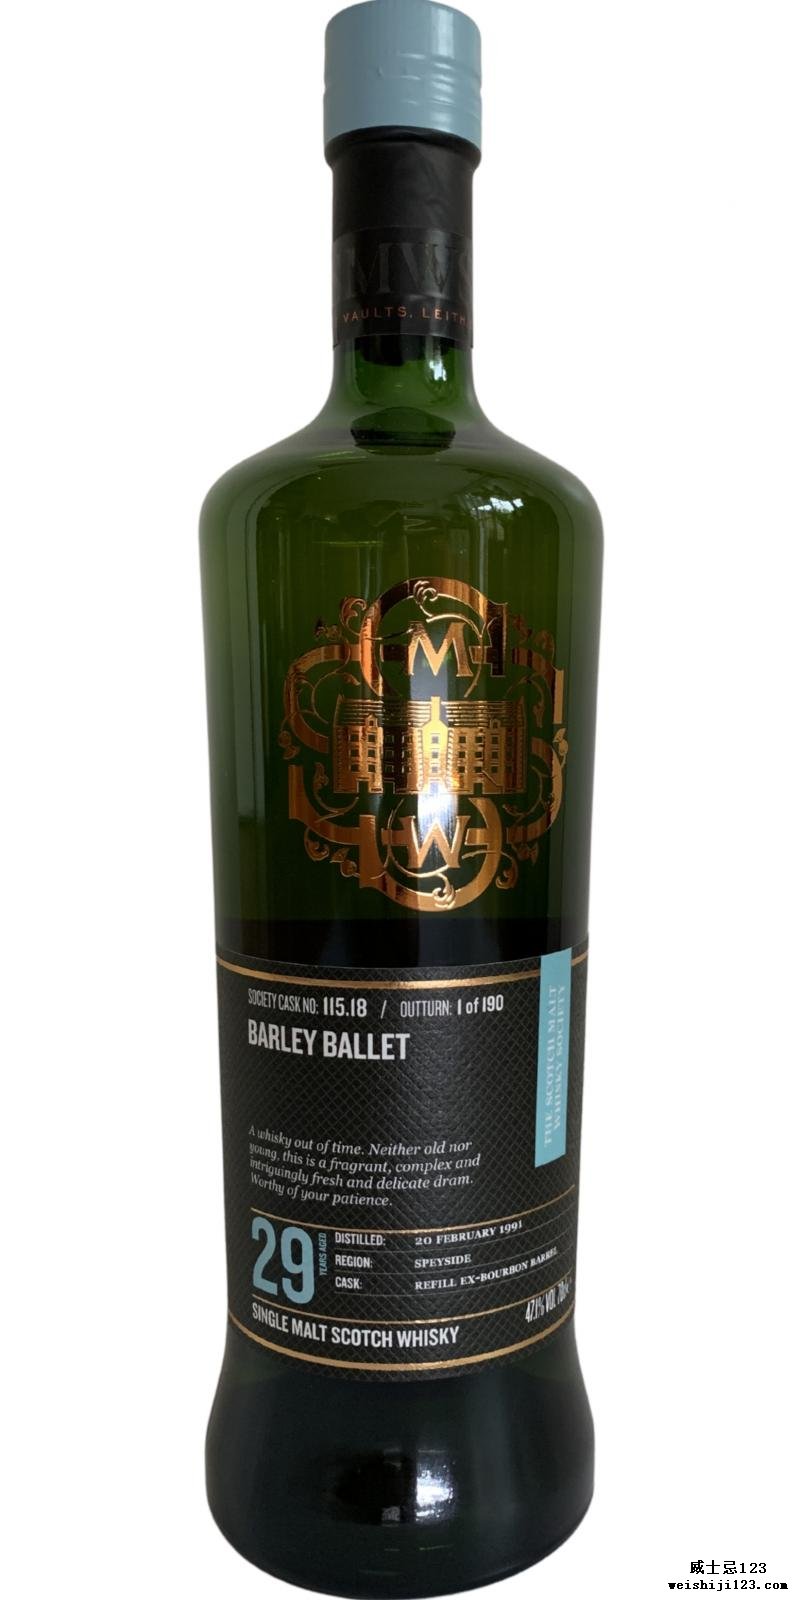 An Cnoc 1991 SMWS 115.18